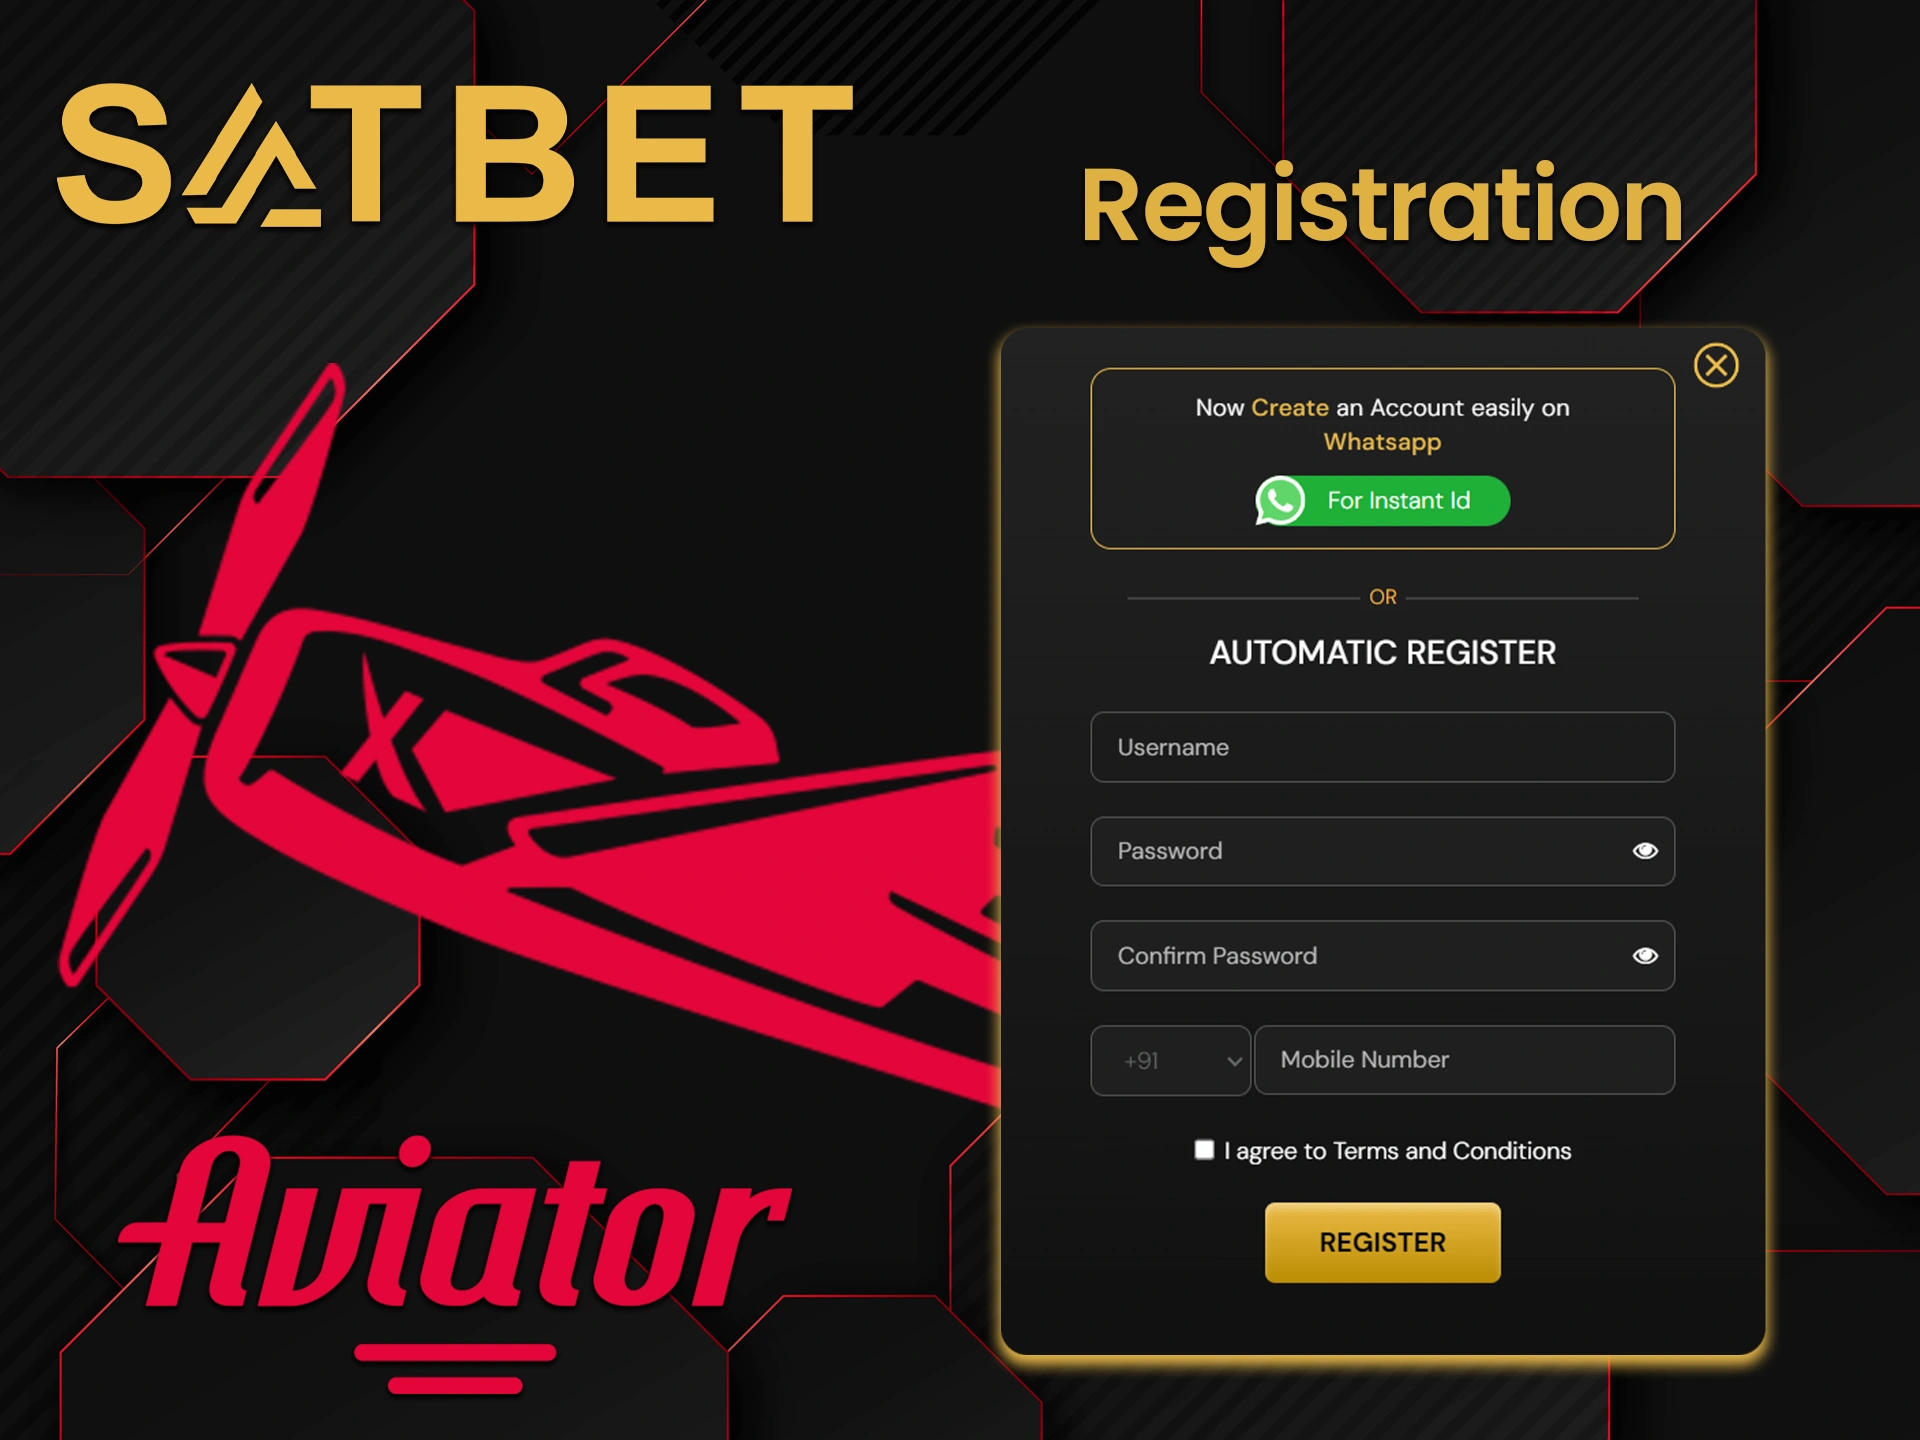 Register on Satbet and you can start playing Aviator.